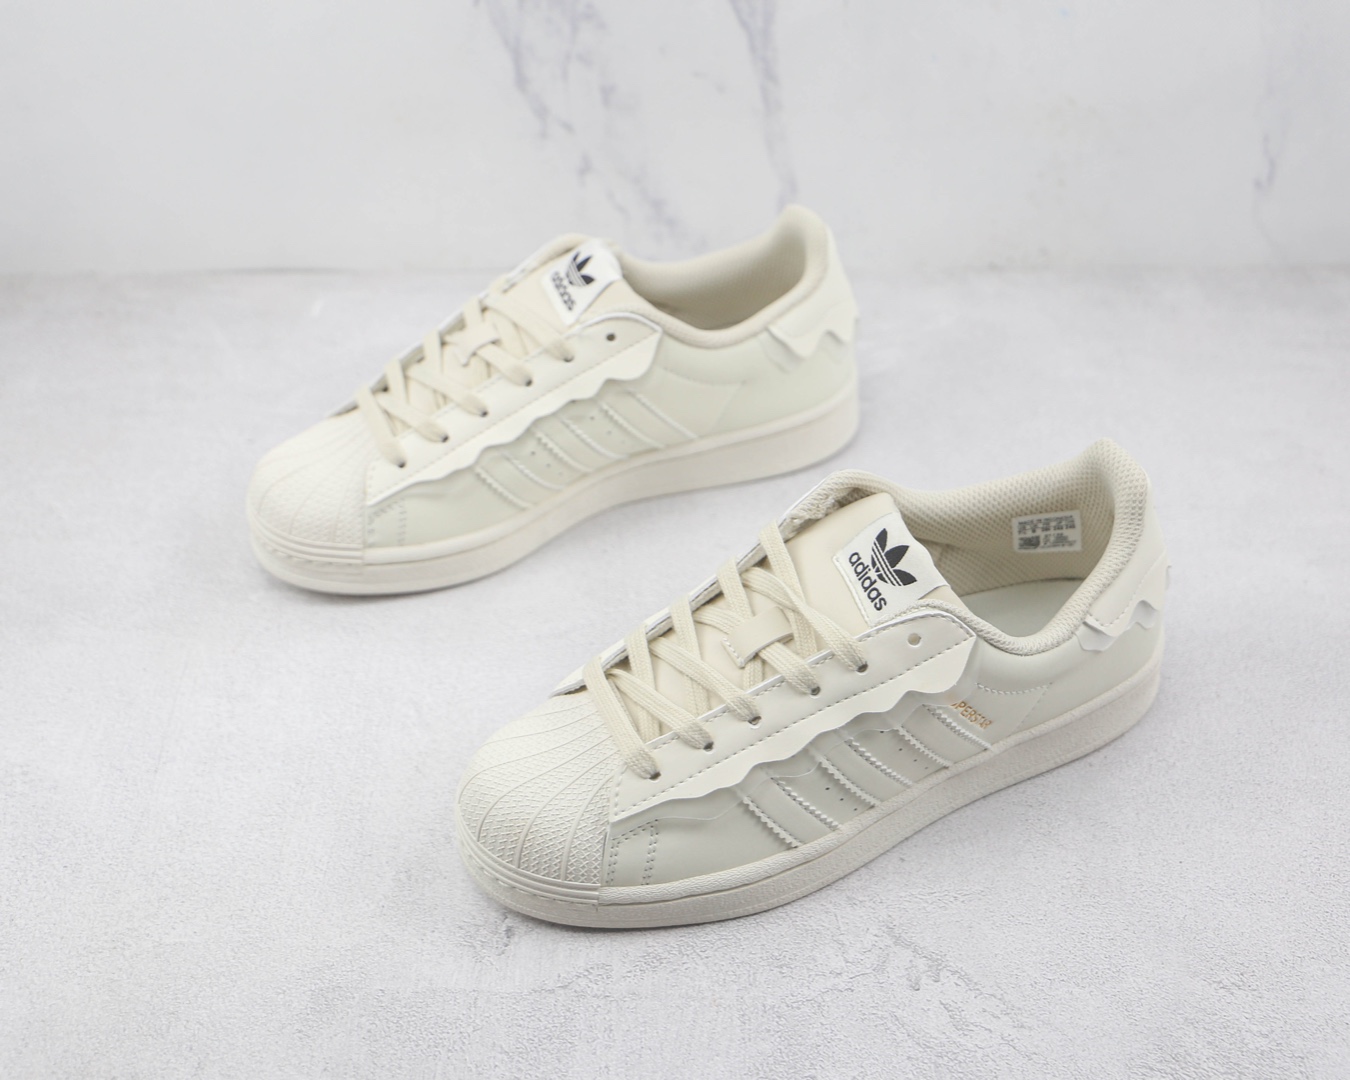 Originals White/Lace" 100% Original flagship store Adidas Shoes for women authentic original sneakers sale Low Cut travel brand rubber casual shoes running shoes new Comfortable Breathable summer